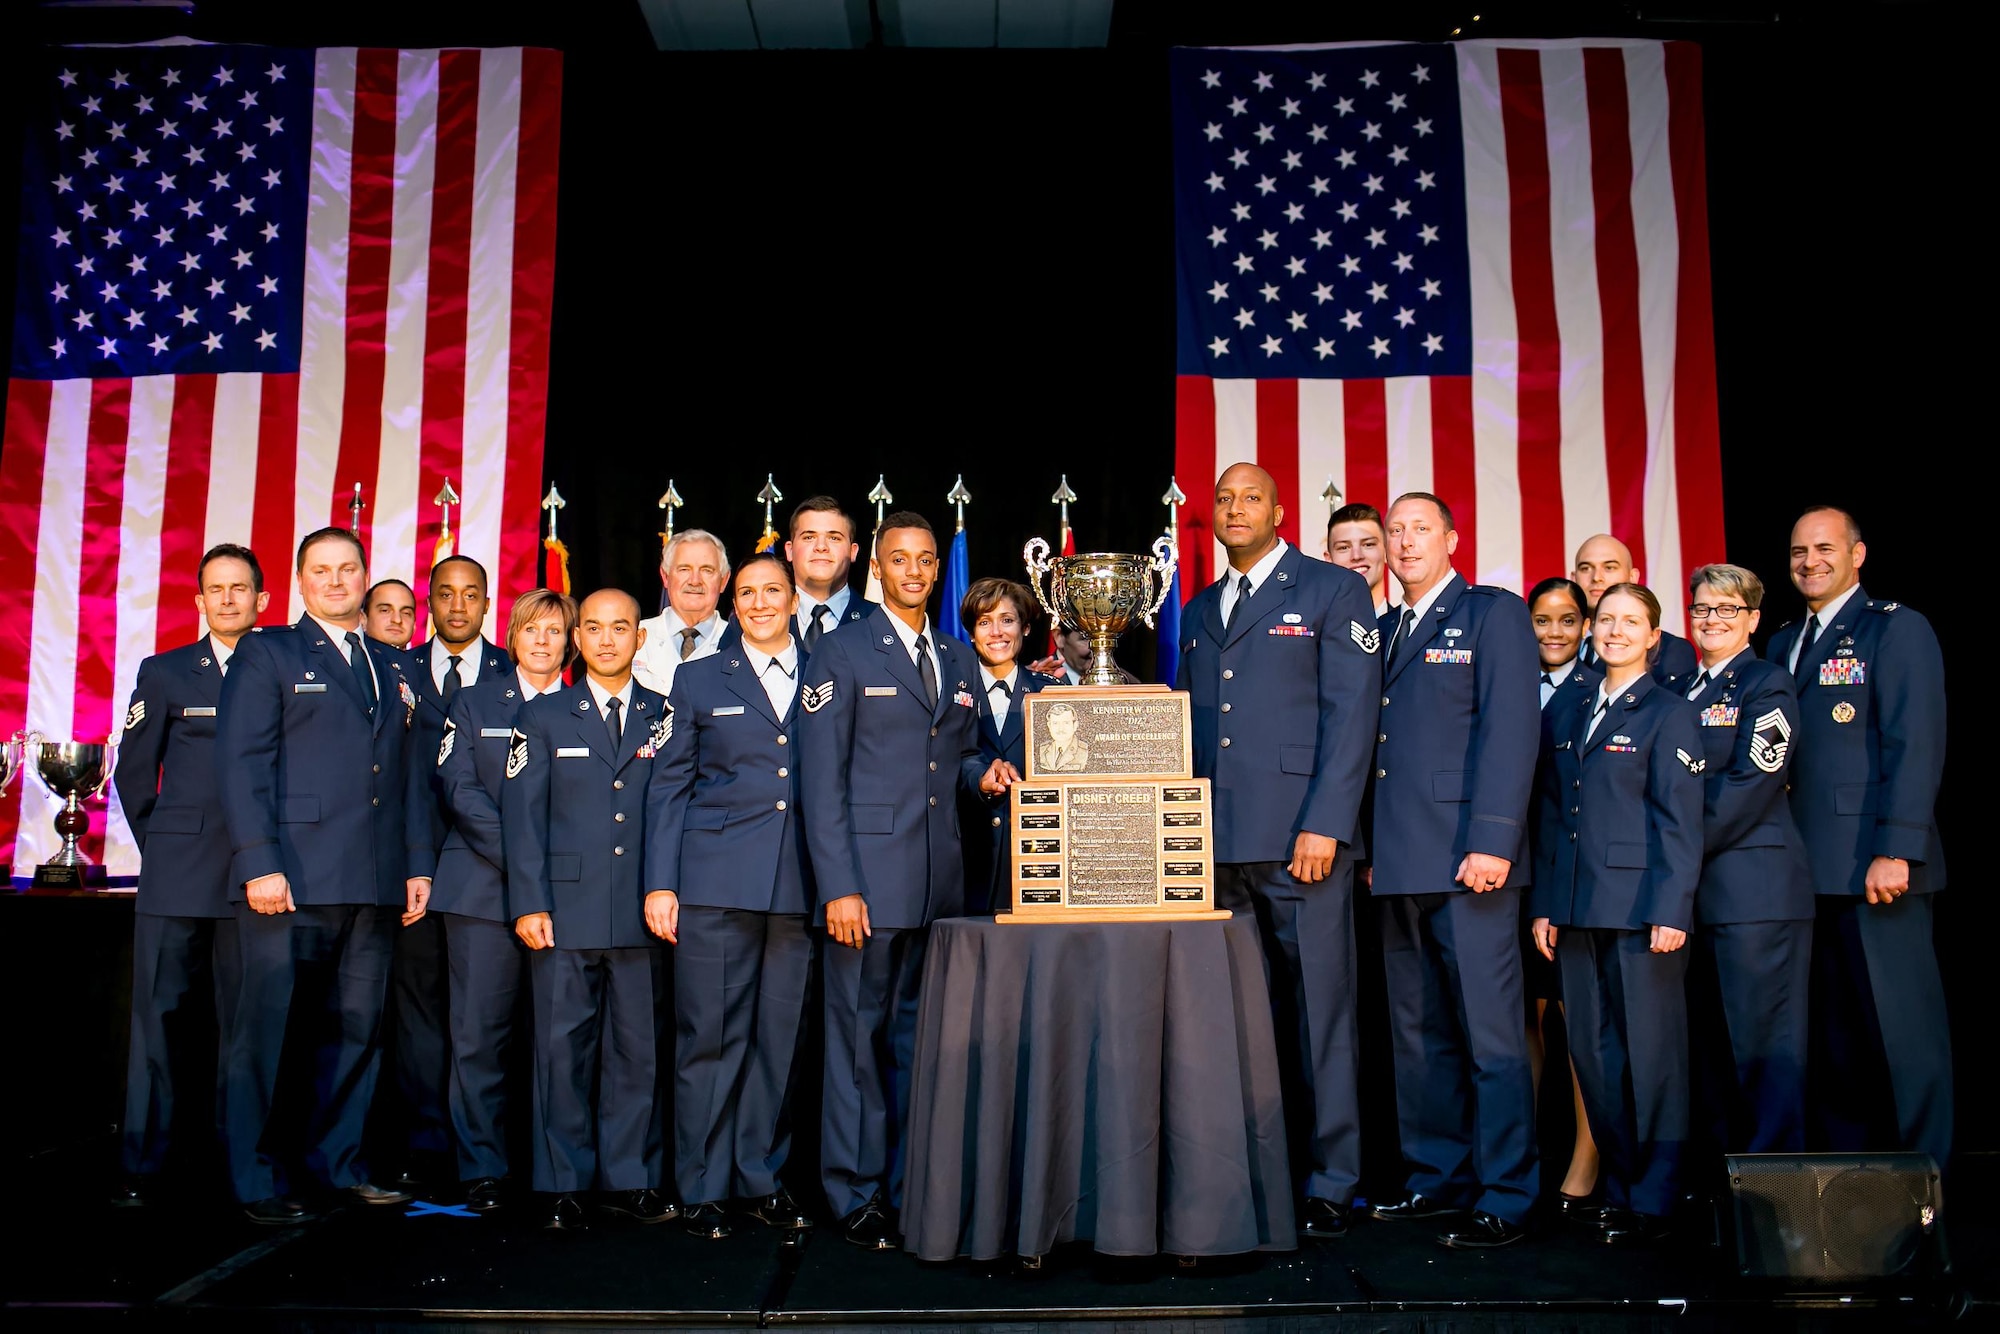 Members of the Kentucky Air National Guard’s 123rd Services Flight receive the Senior Master Sgt. Kenneth W. Disney Award of Excellence at the Military Foodservice Awards banquet in Chicago on May 19, 2017. The honor is awarded annually to the best food service operation in the Air National Guard. (Courtesy Photo)